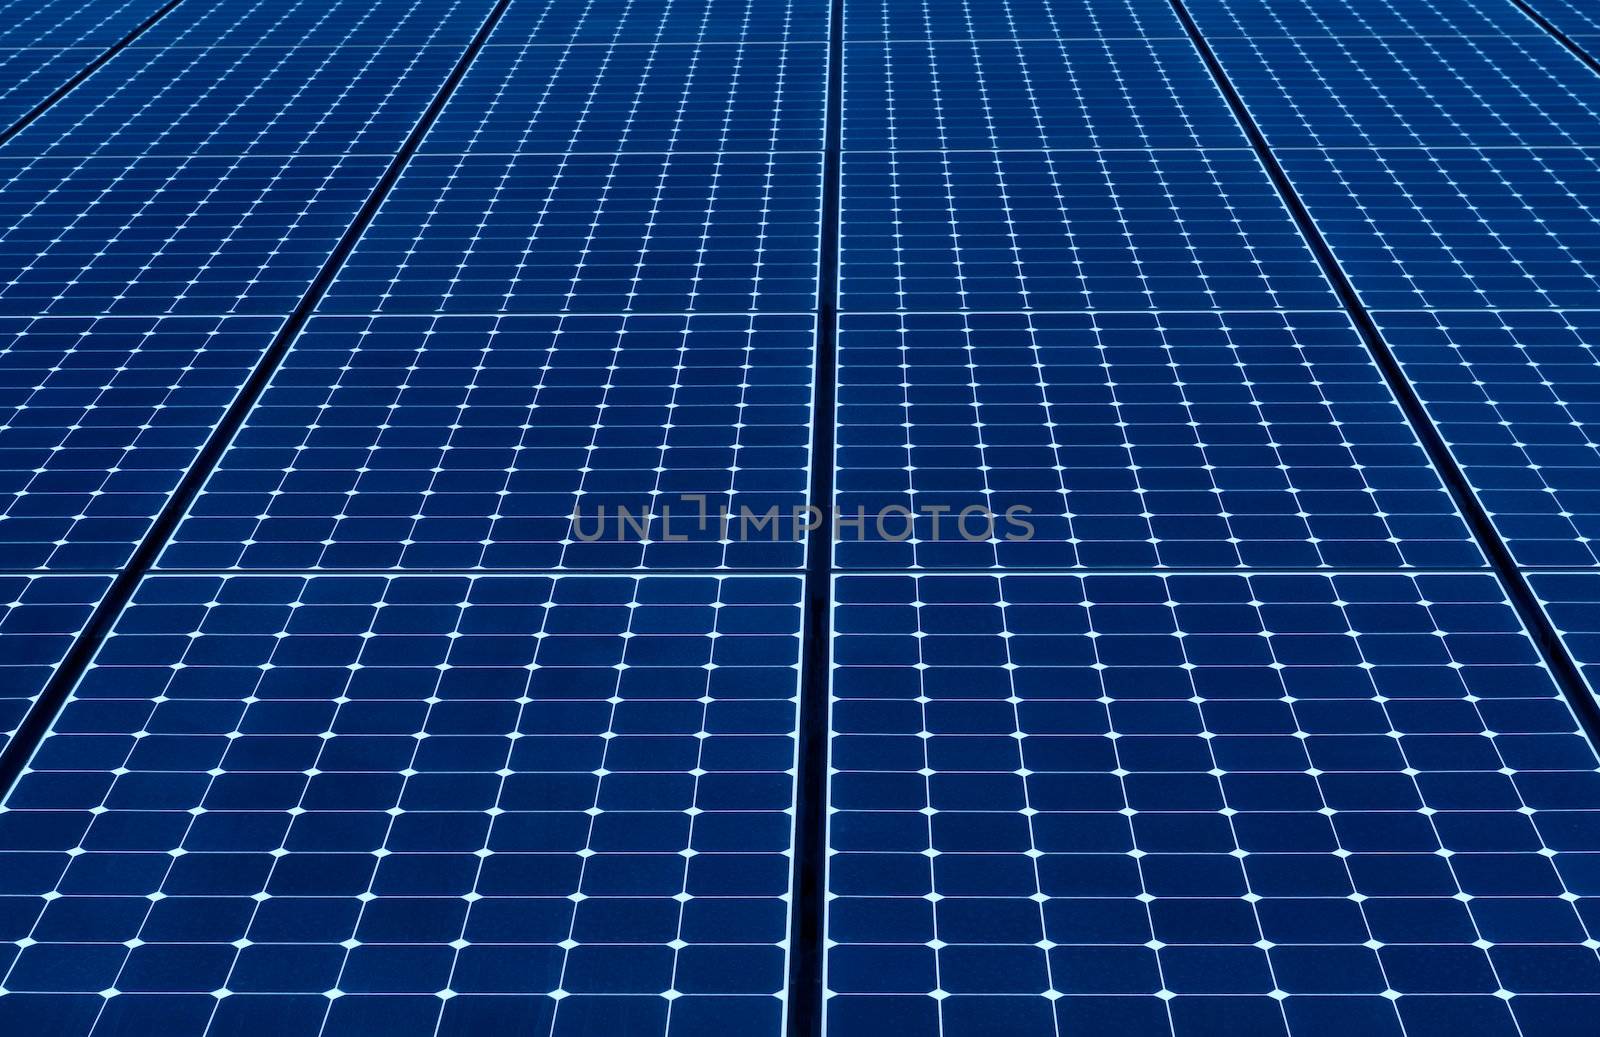 long endless row of blue solar panels to produce electricity